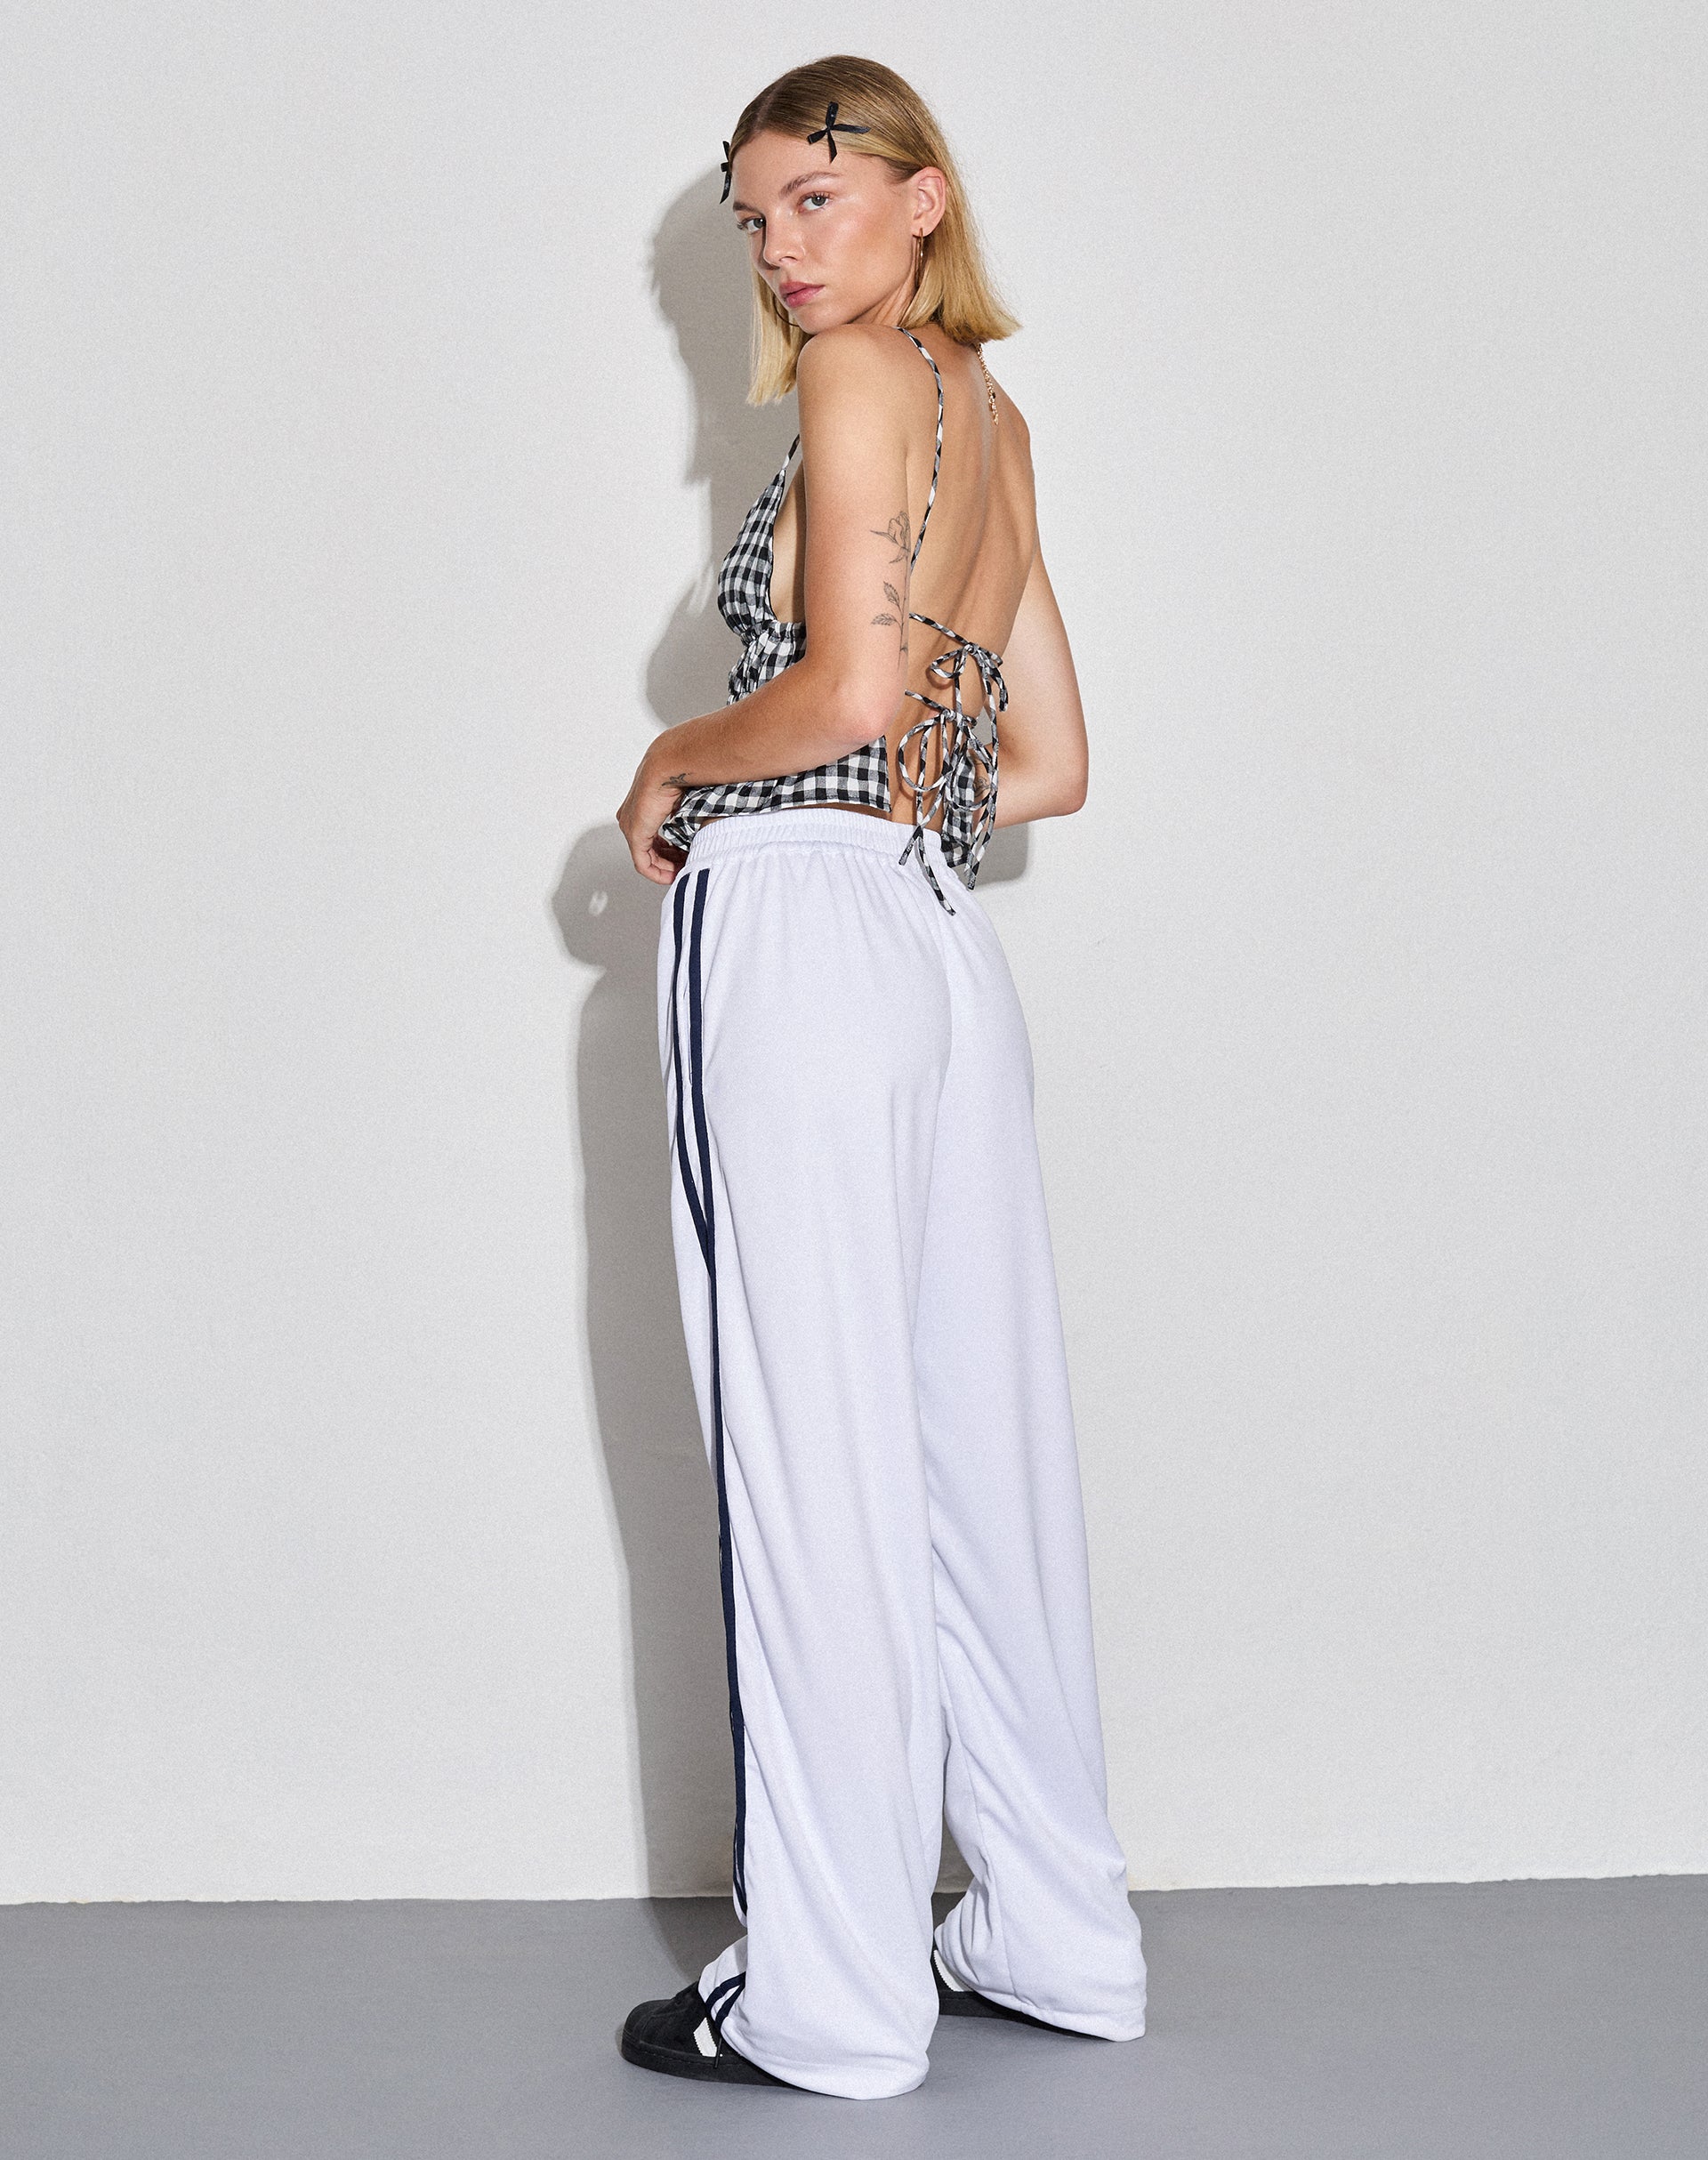 Image of Coze Wide Leg Jogger in White with Navy Double Stripe